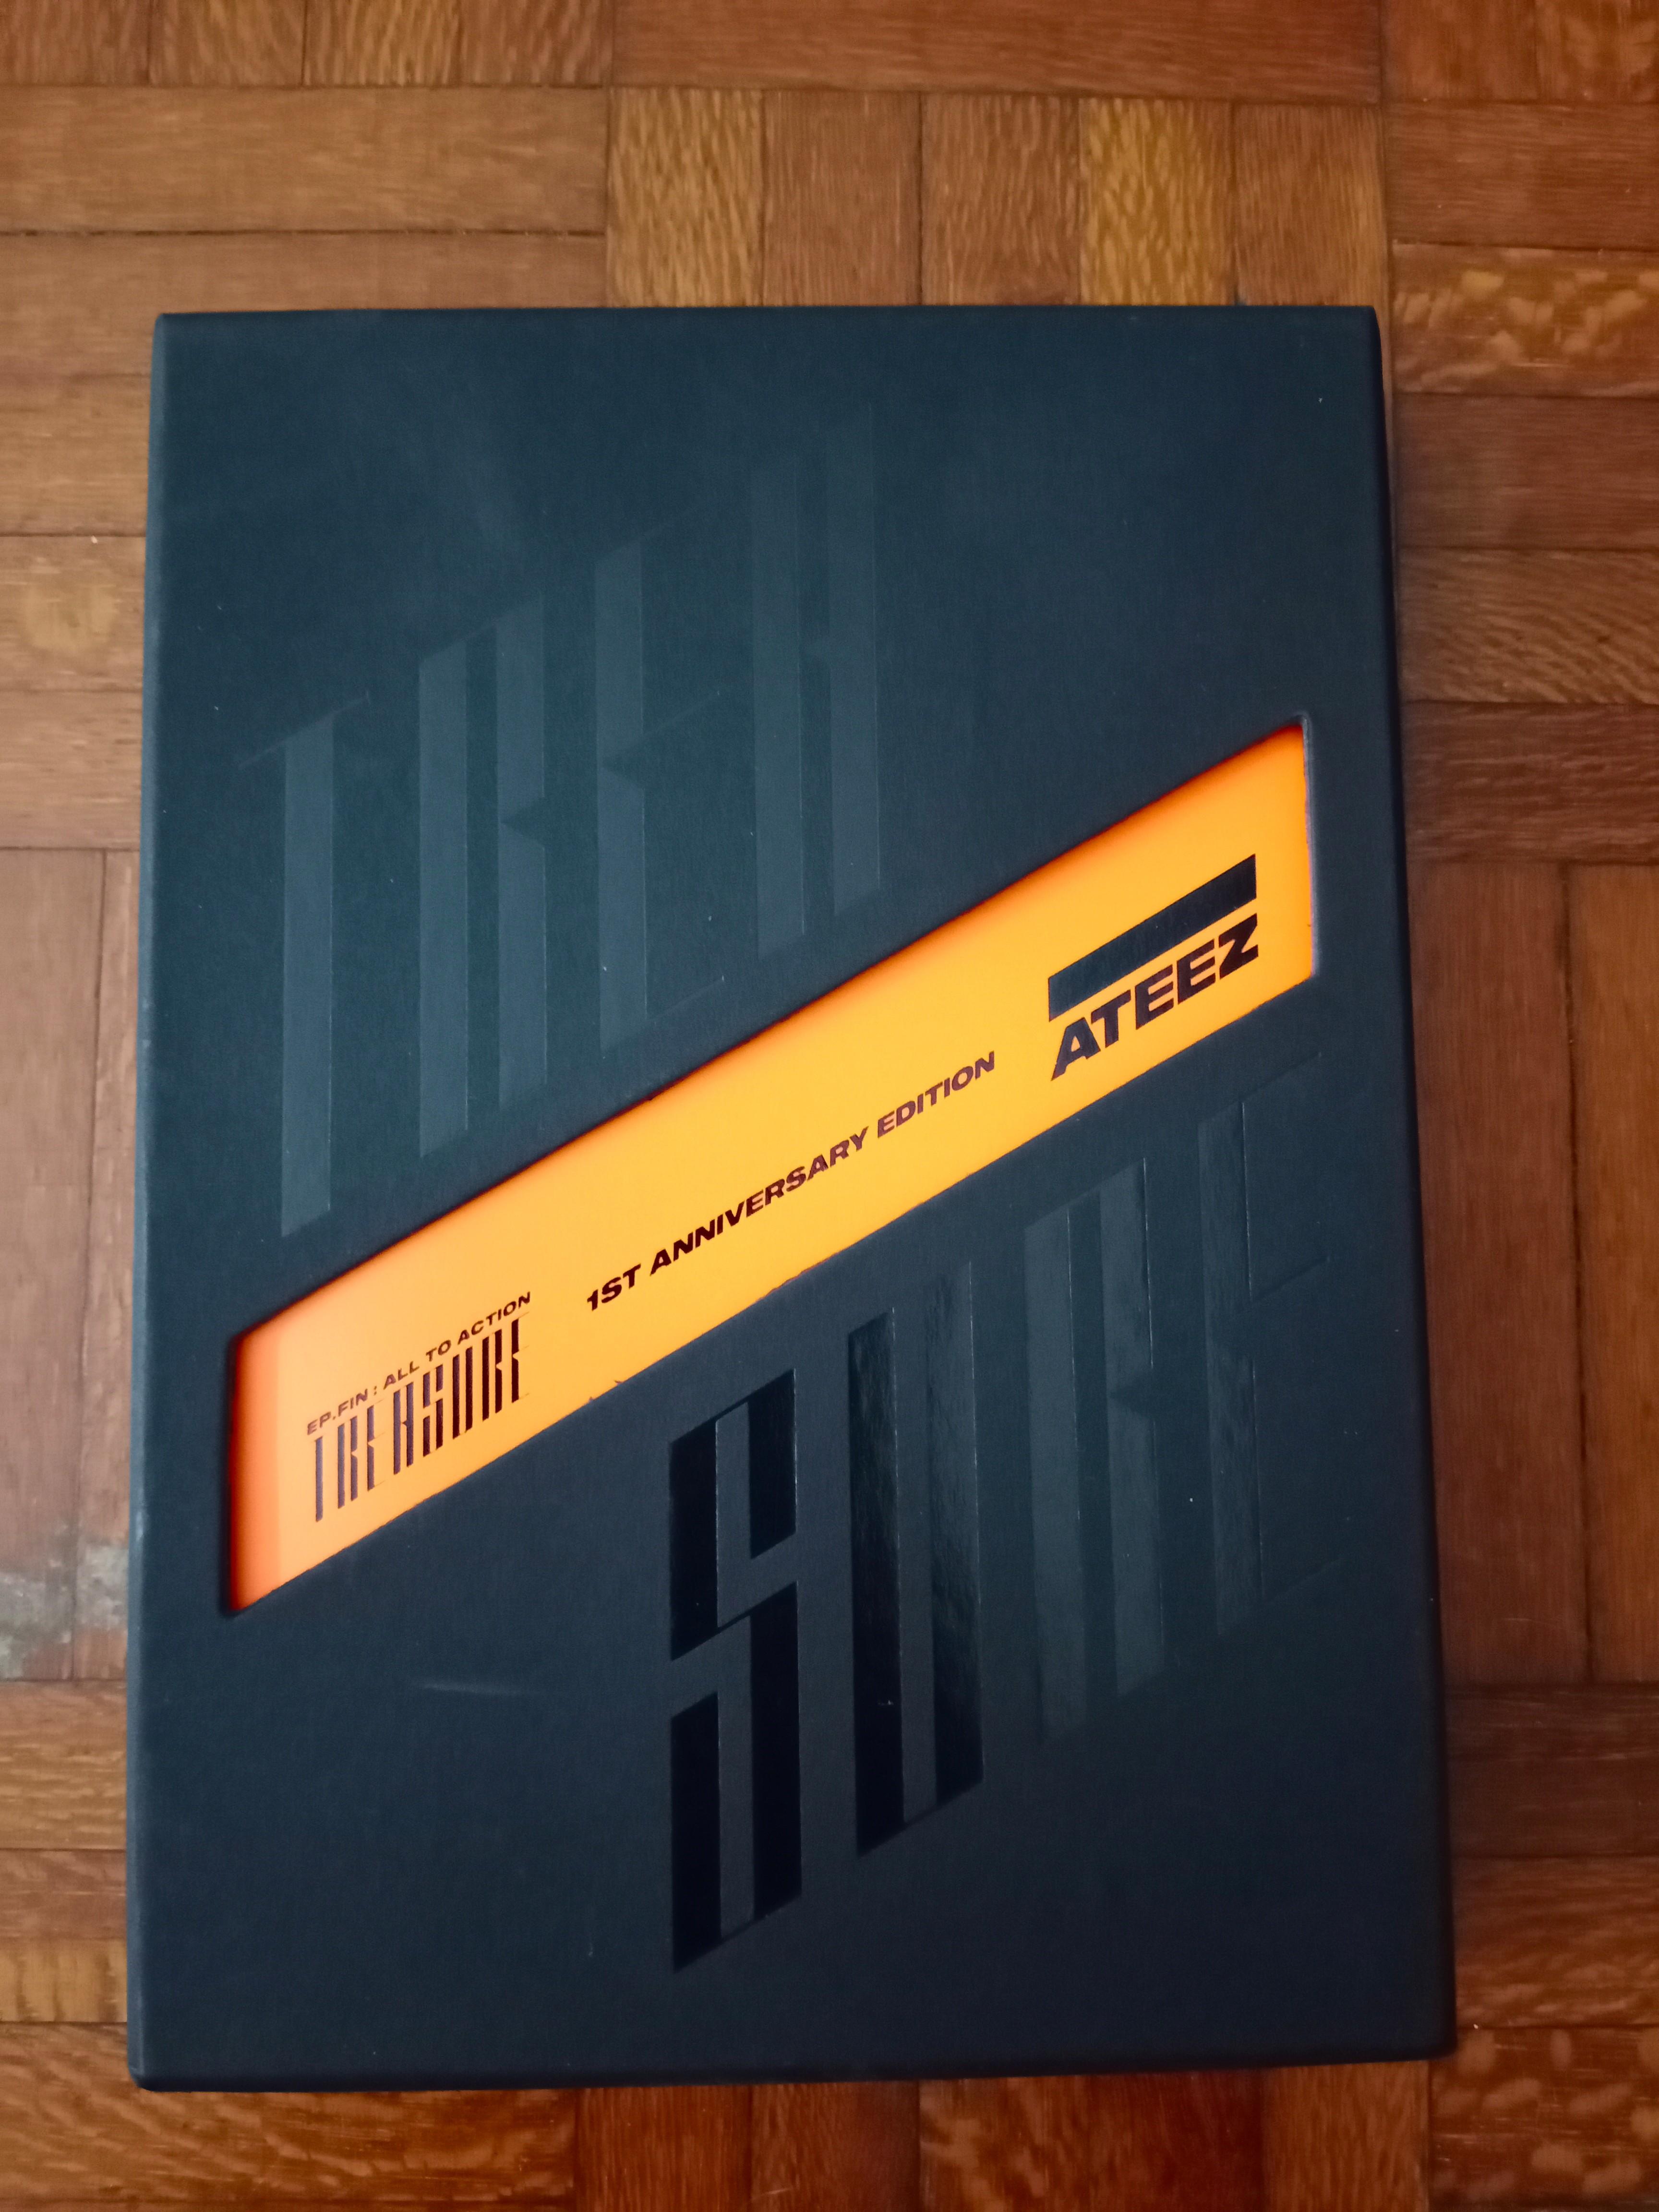 WTS ATEEZ LIMITED EDITION ALL TO ACTION 1ST ANNIVERSARY ALBUM ...